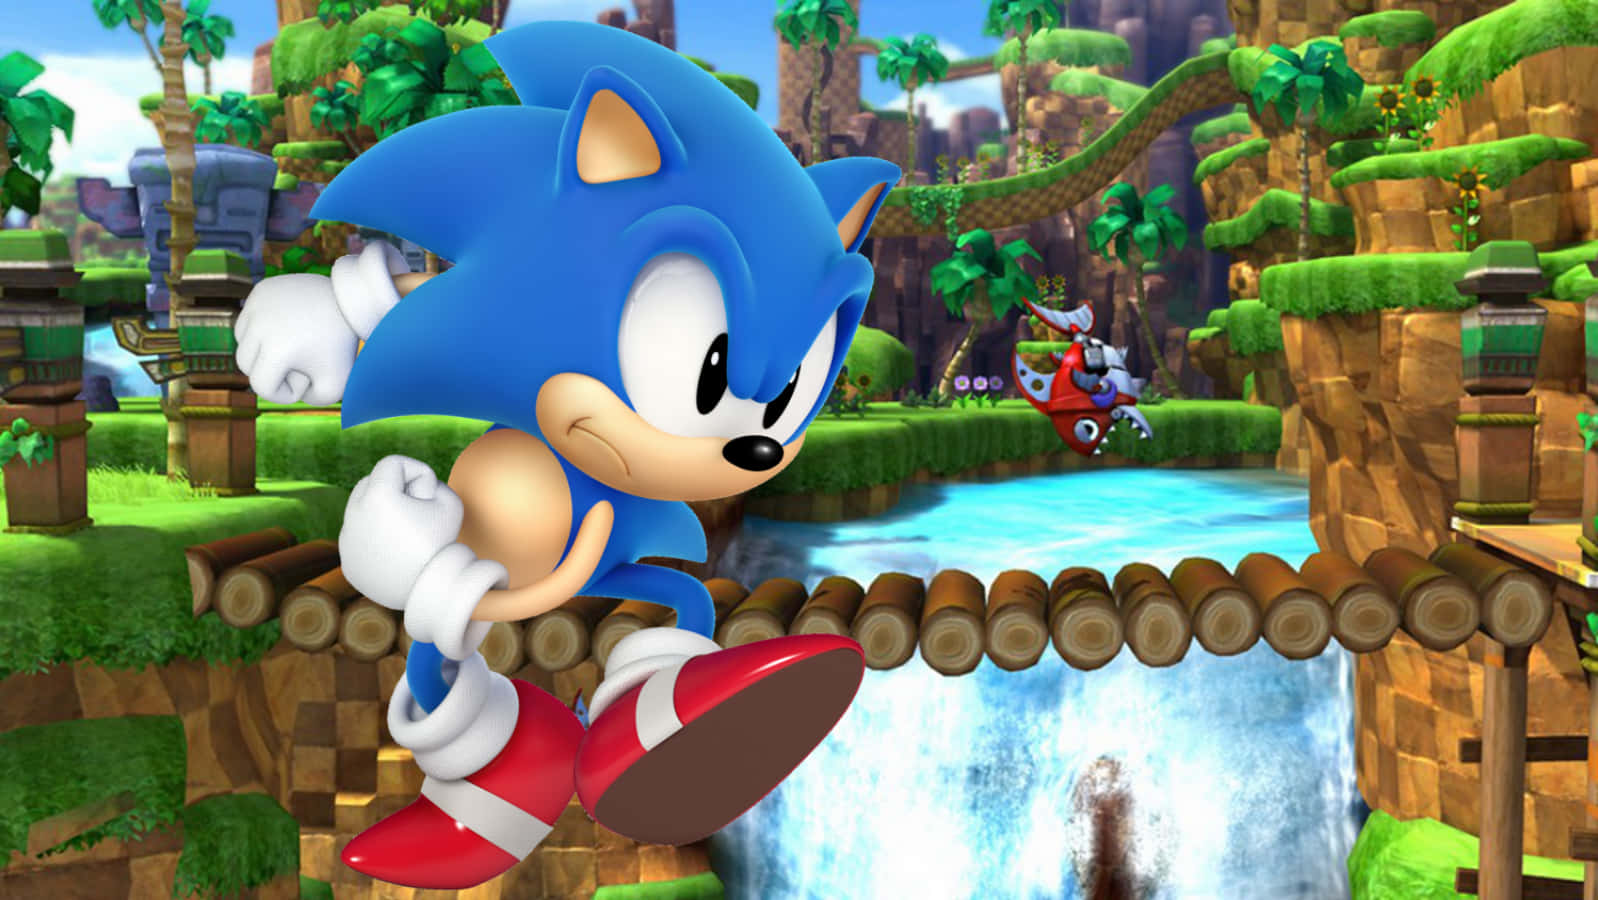 Classic Sonic the Hedgehog Is Ready For Adventure!